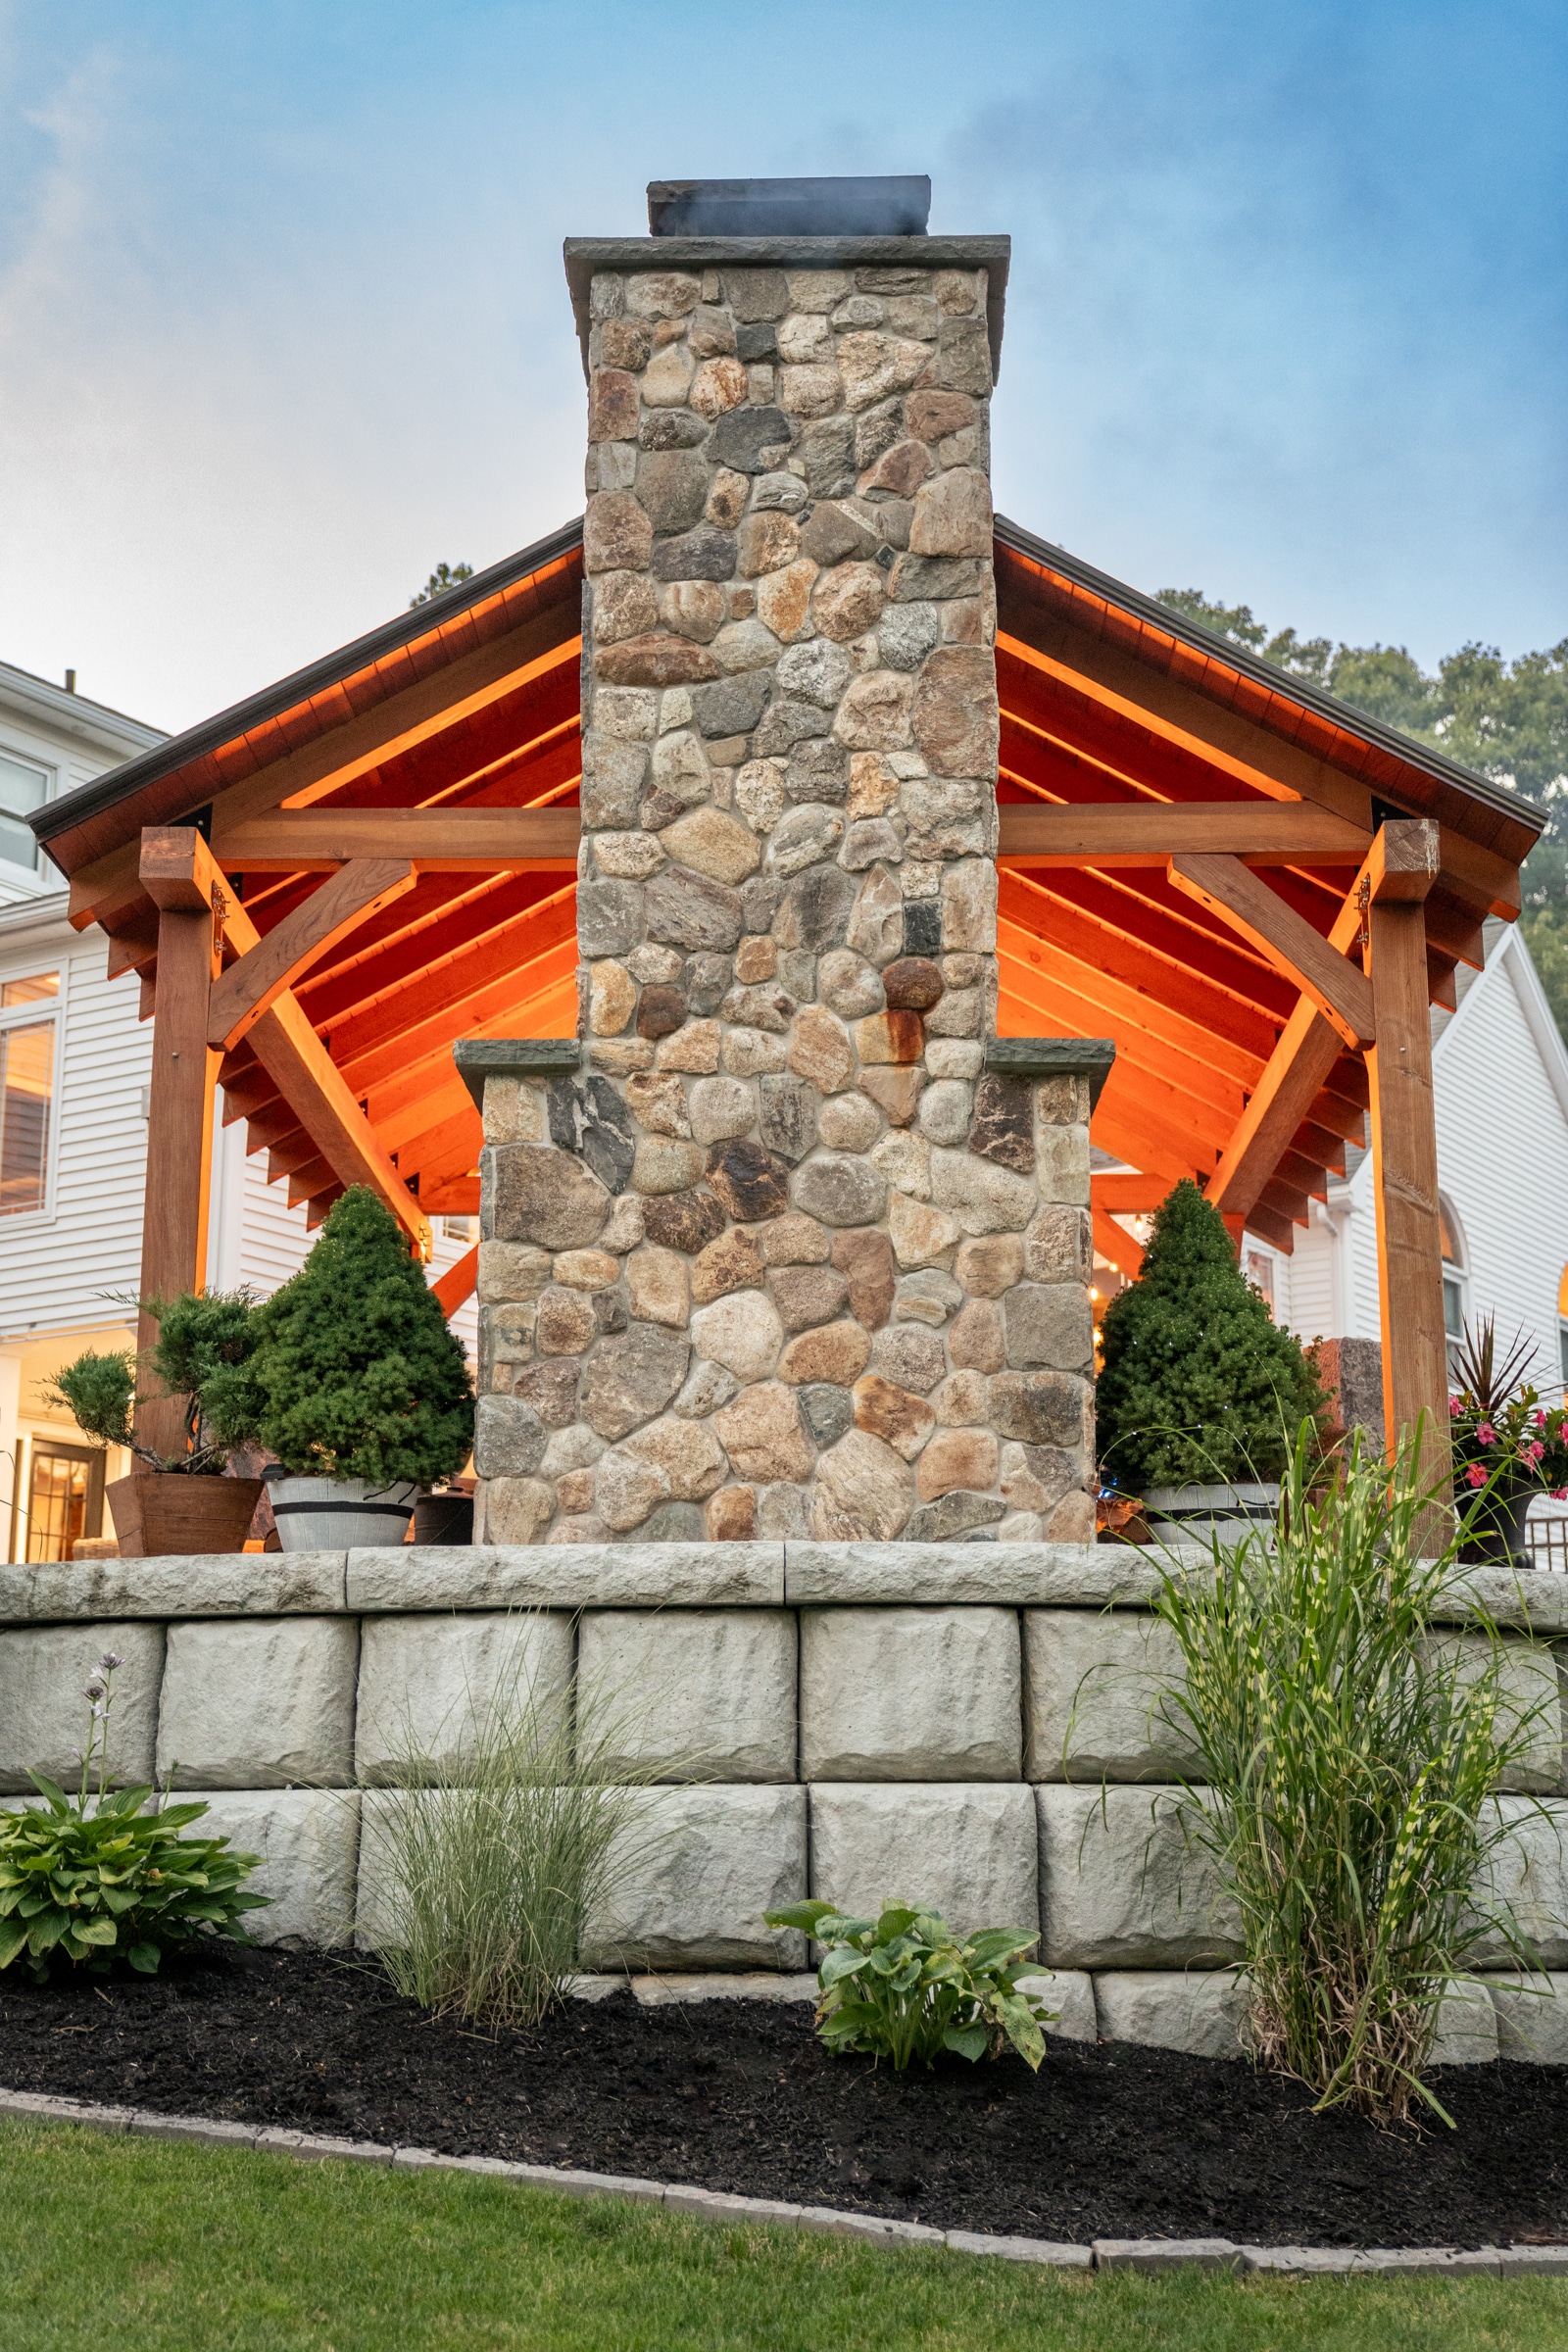 New England Rounds stone veneer was used to create the outdoor fireplace that warms the relaxation area under the pergola.